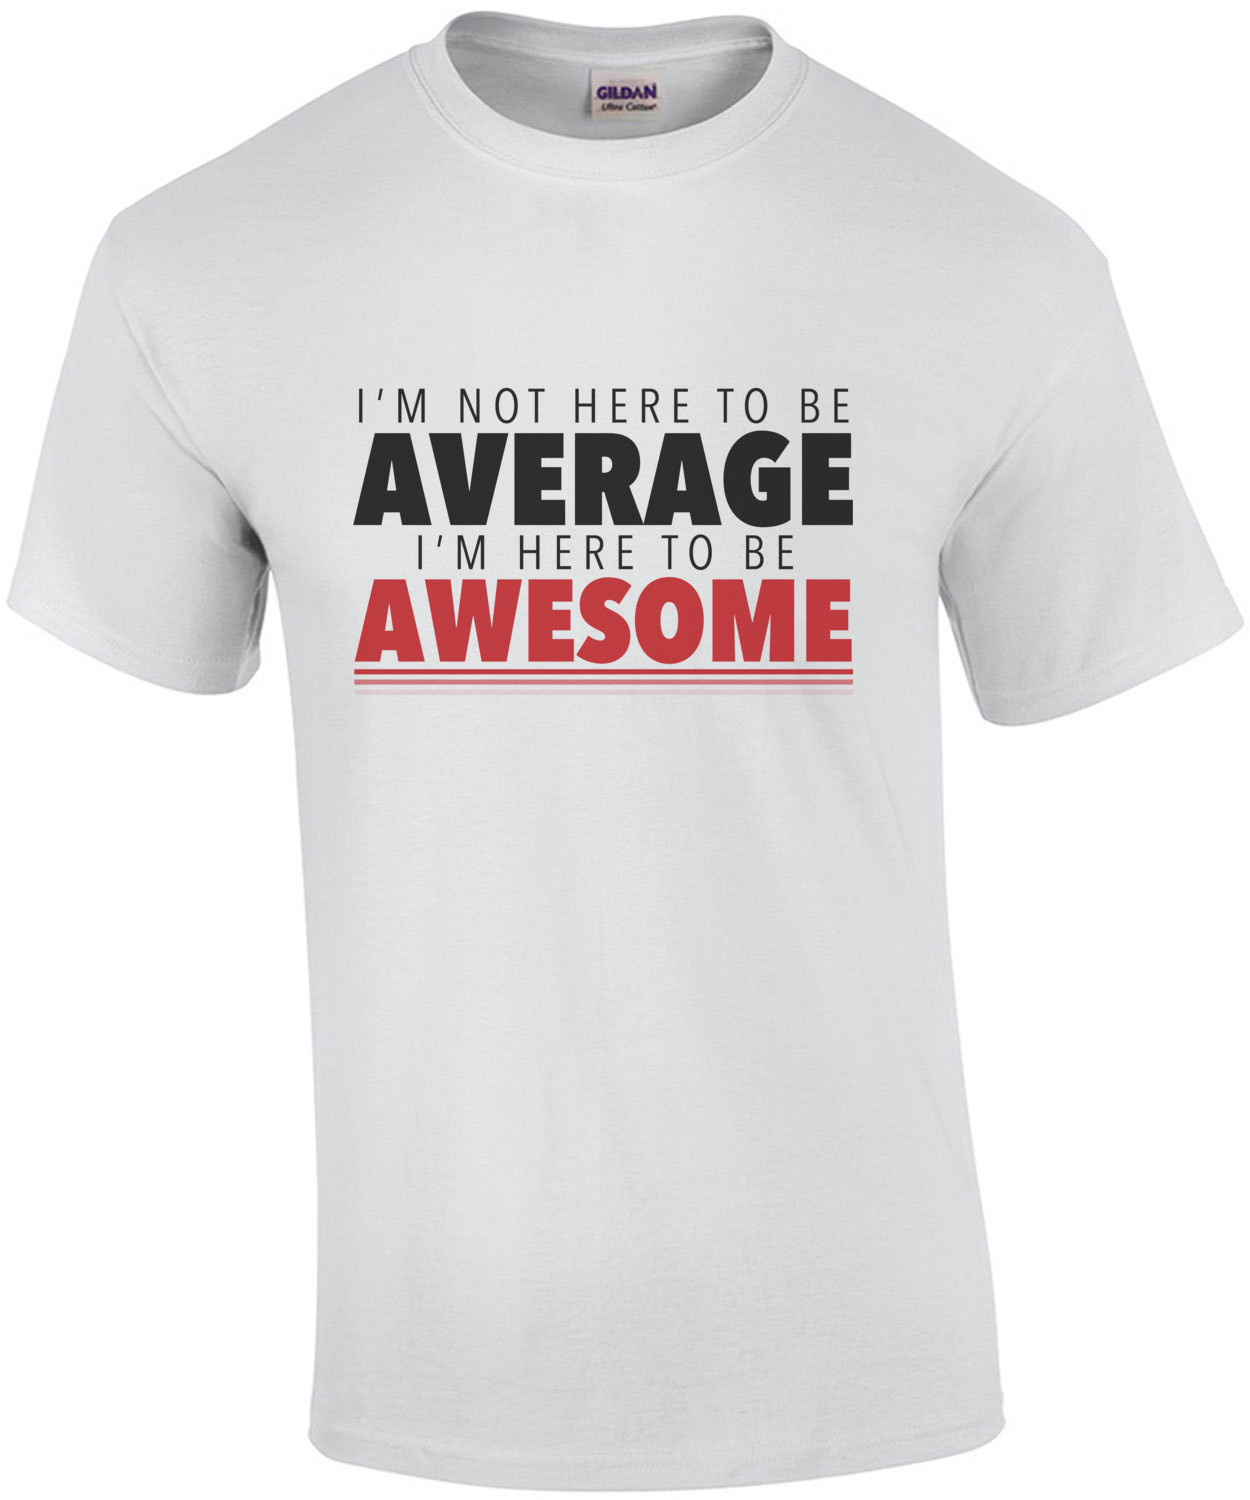 I'm not here to be average - I'm here to be awesome - funny t-shirt